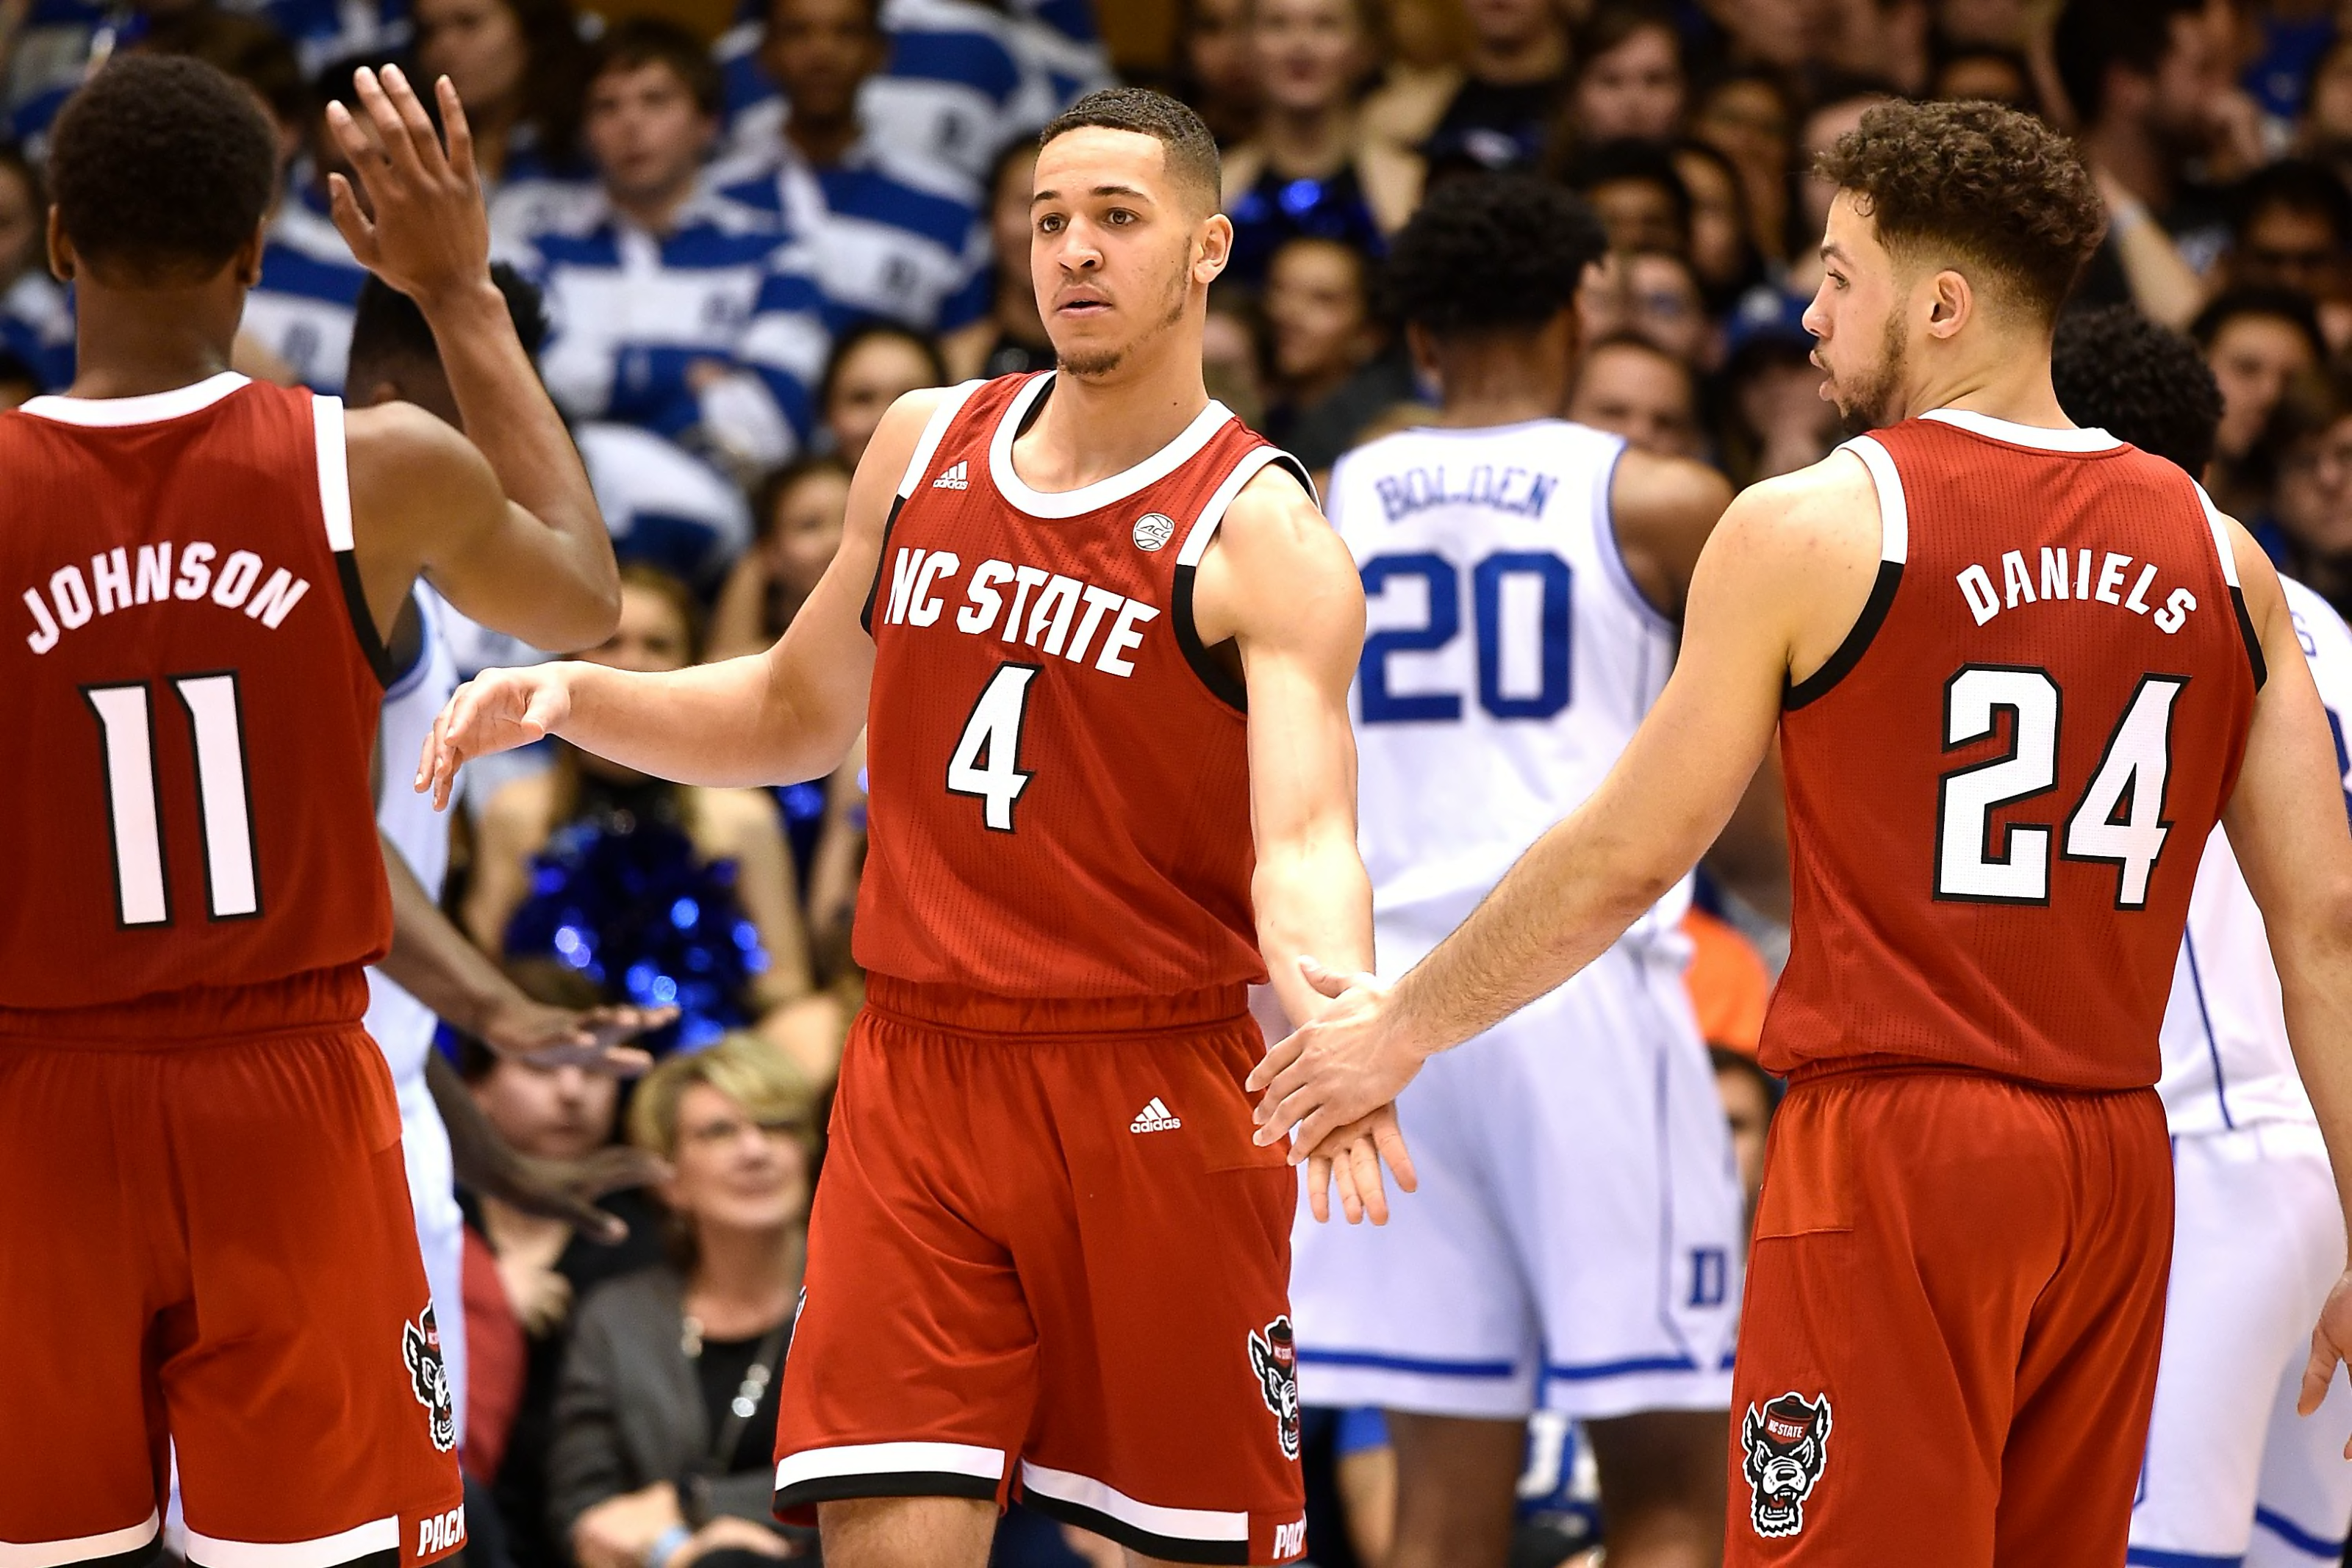 3 takeaways from N.C. State basketball media day